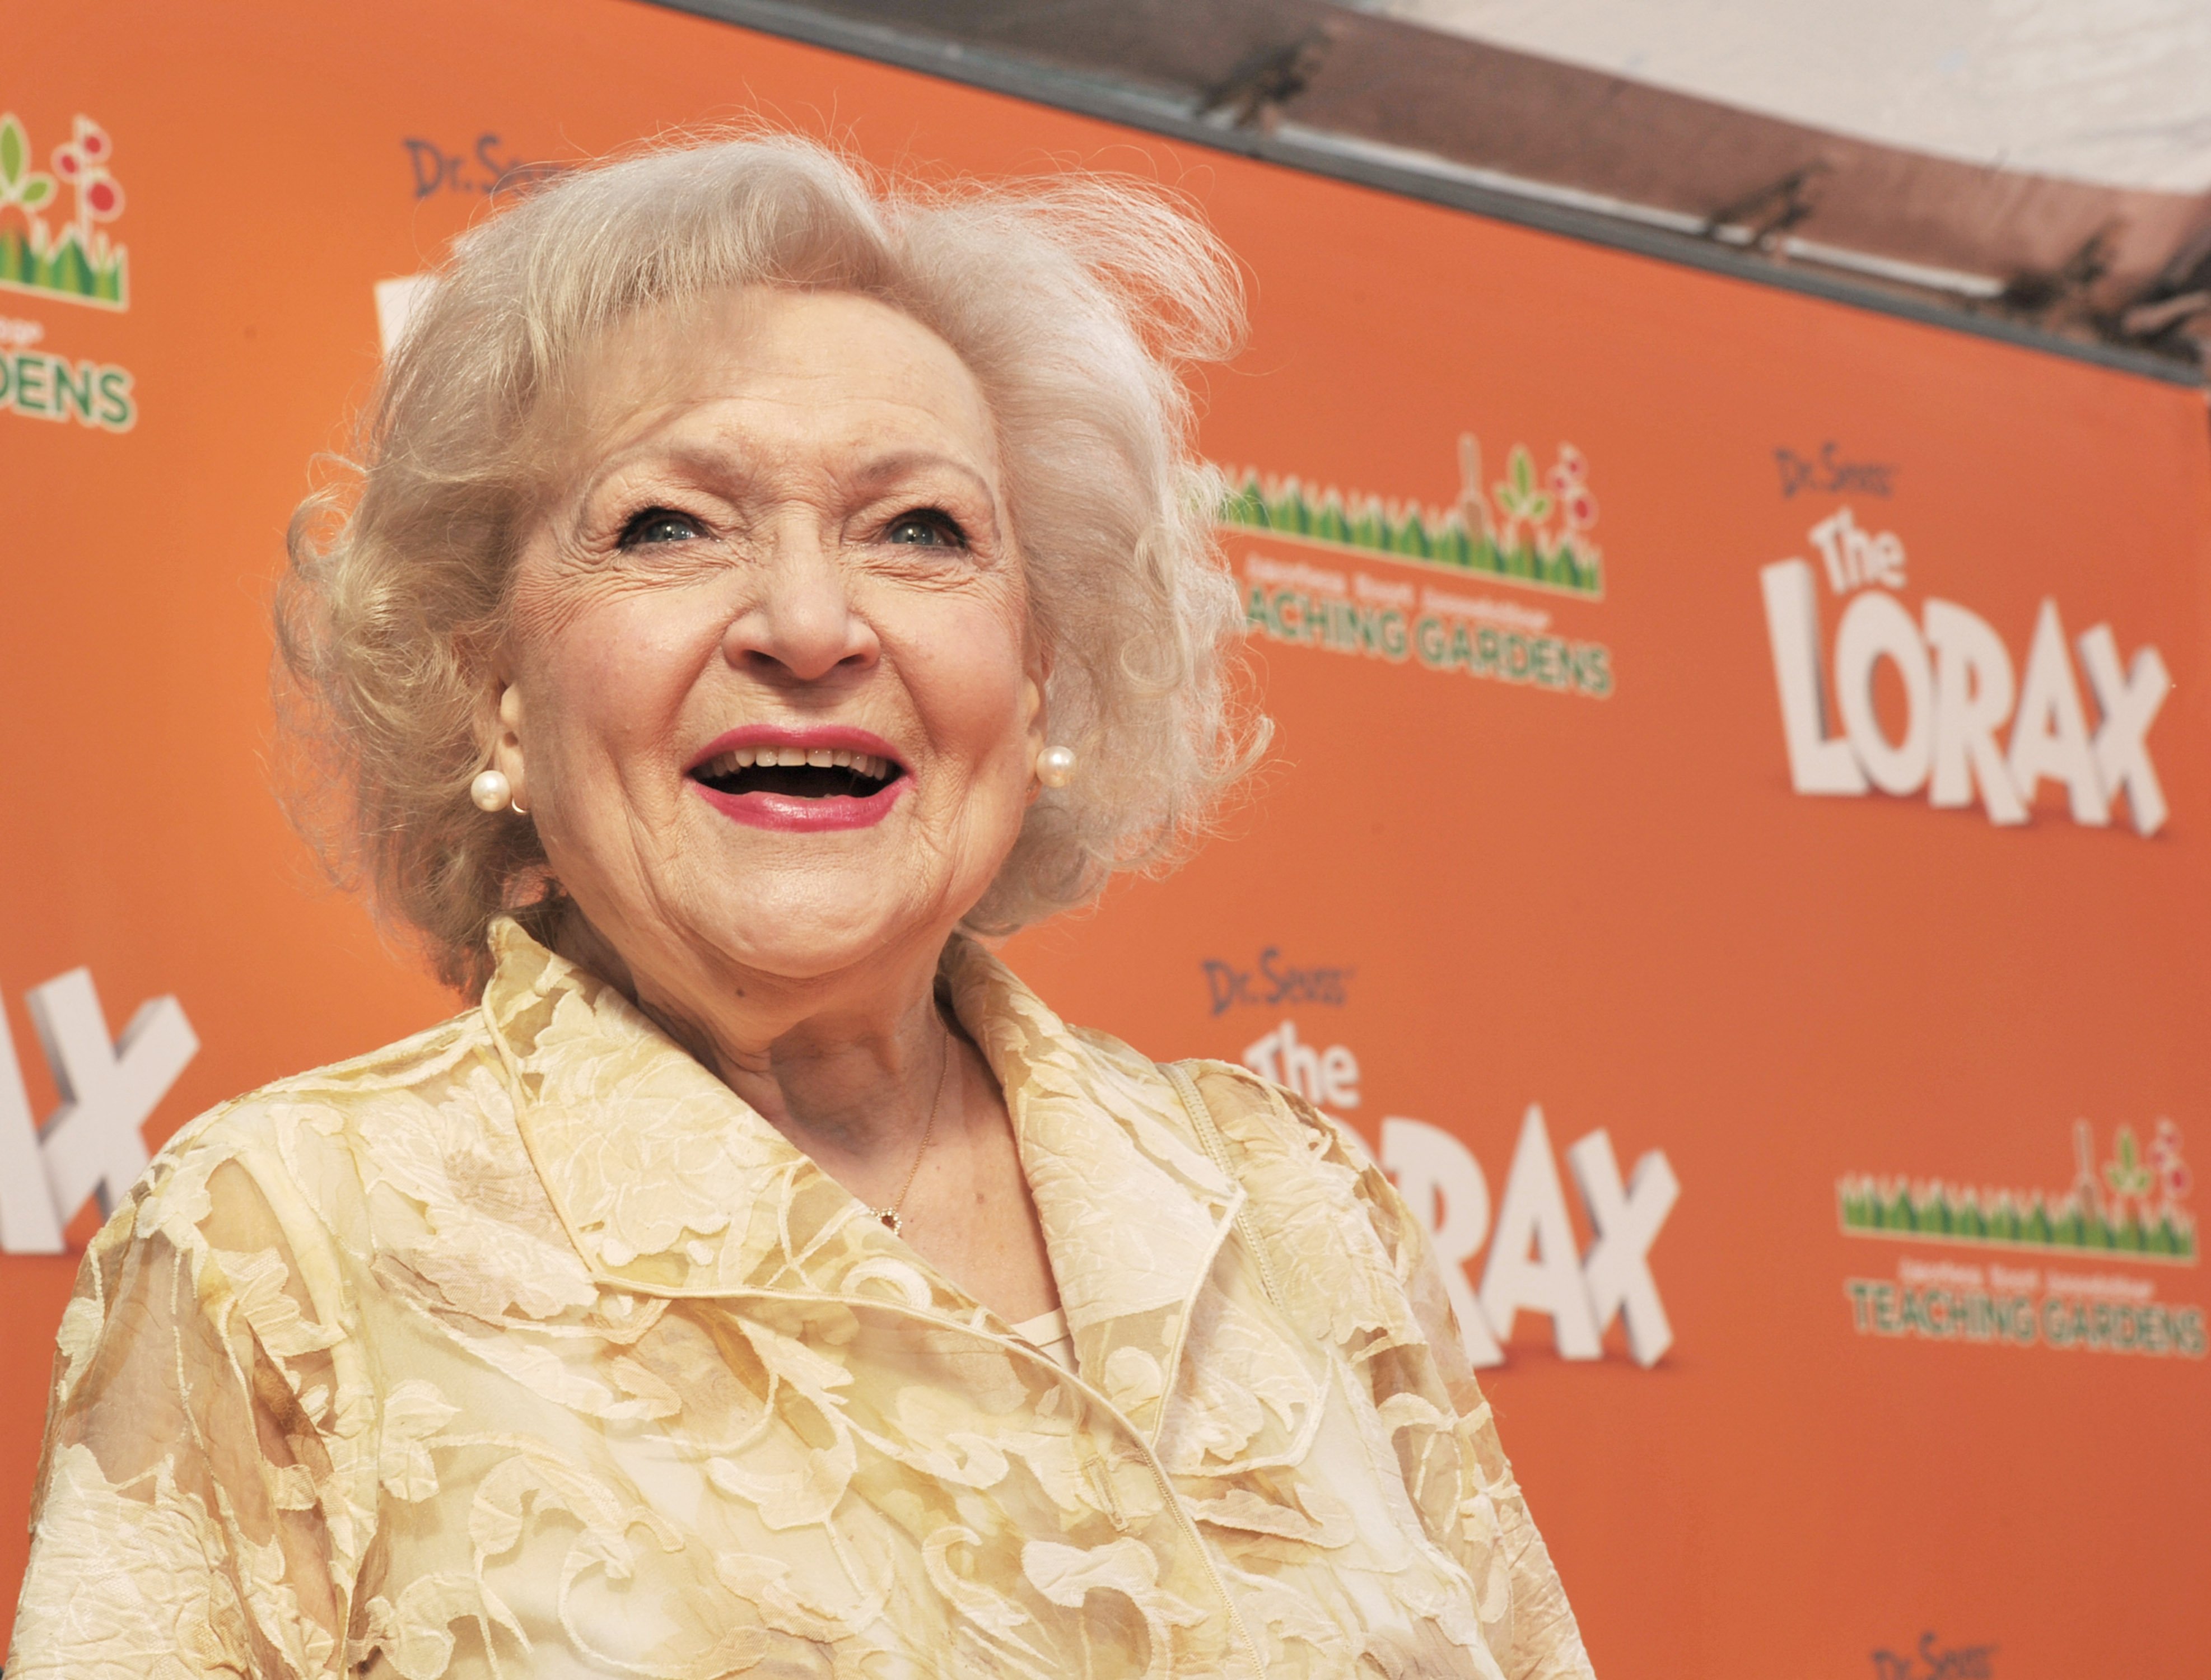 Betty White at the premiere of "Dr. Seuss' The Lorax" at Citywalk on February 19, 2012 | Photo: GettyImages